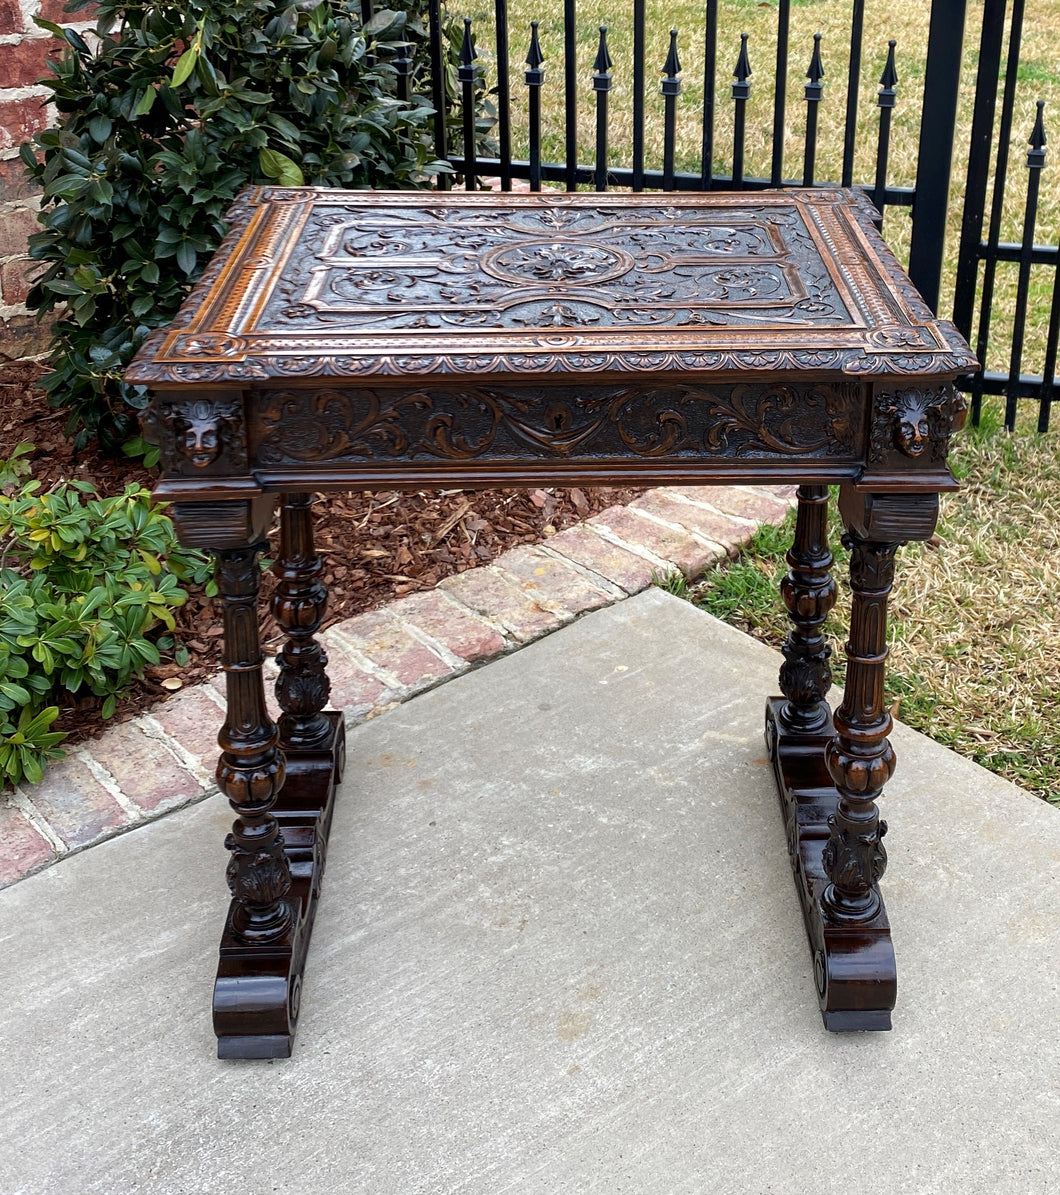 Antique English Walnut Sewing Table End Table Game Card Table Lift Top Humidor